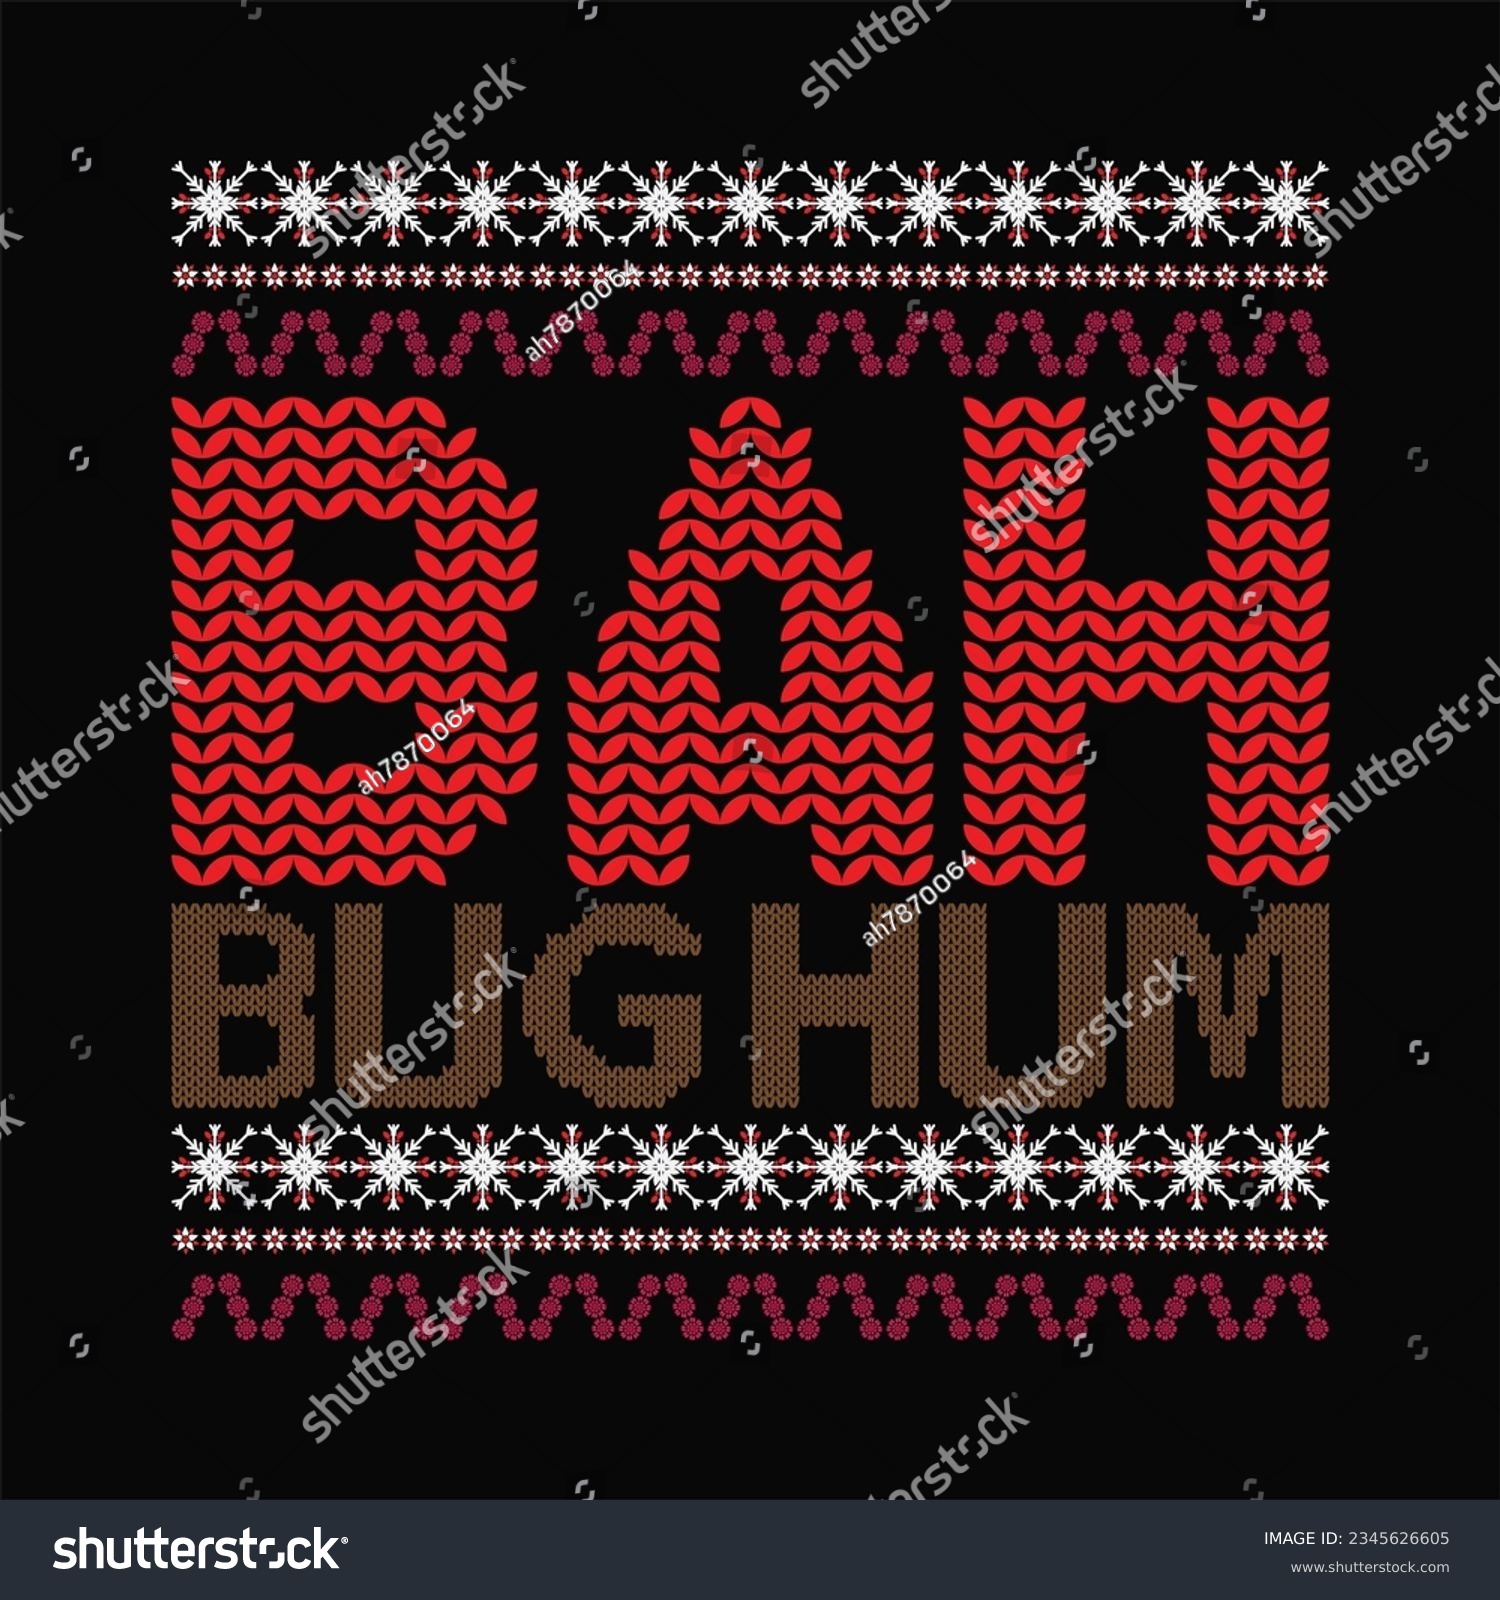 SVG of Bah hum bug Christmas t-shirt design. Here You Can find and Buy t-Shirt Design. Digital Files for yourself, friends and family, or anyone who supports your Special Day and Occasions. svg